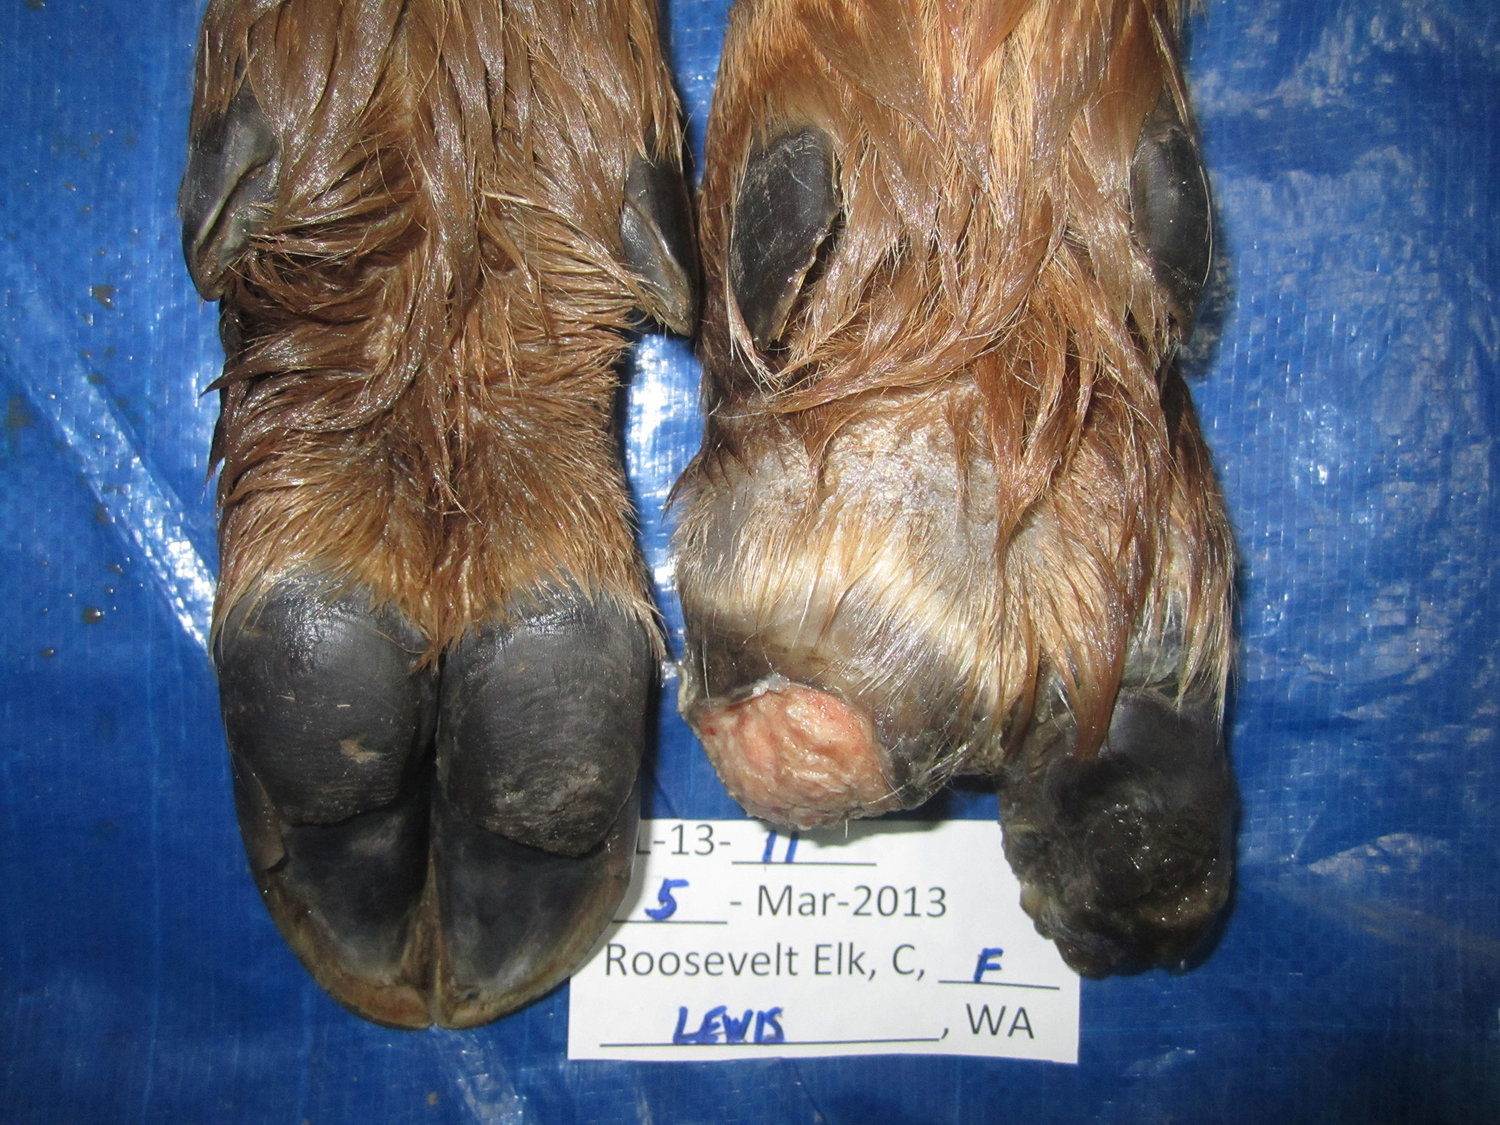 Treponeme-associated hoof disease causes the hoofs of elk to grow long, become deformed and in some cases break off, which forces the animal to walk around on the bone.